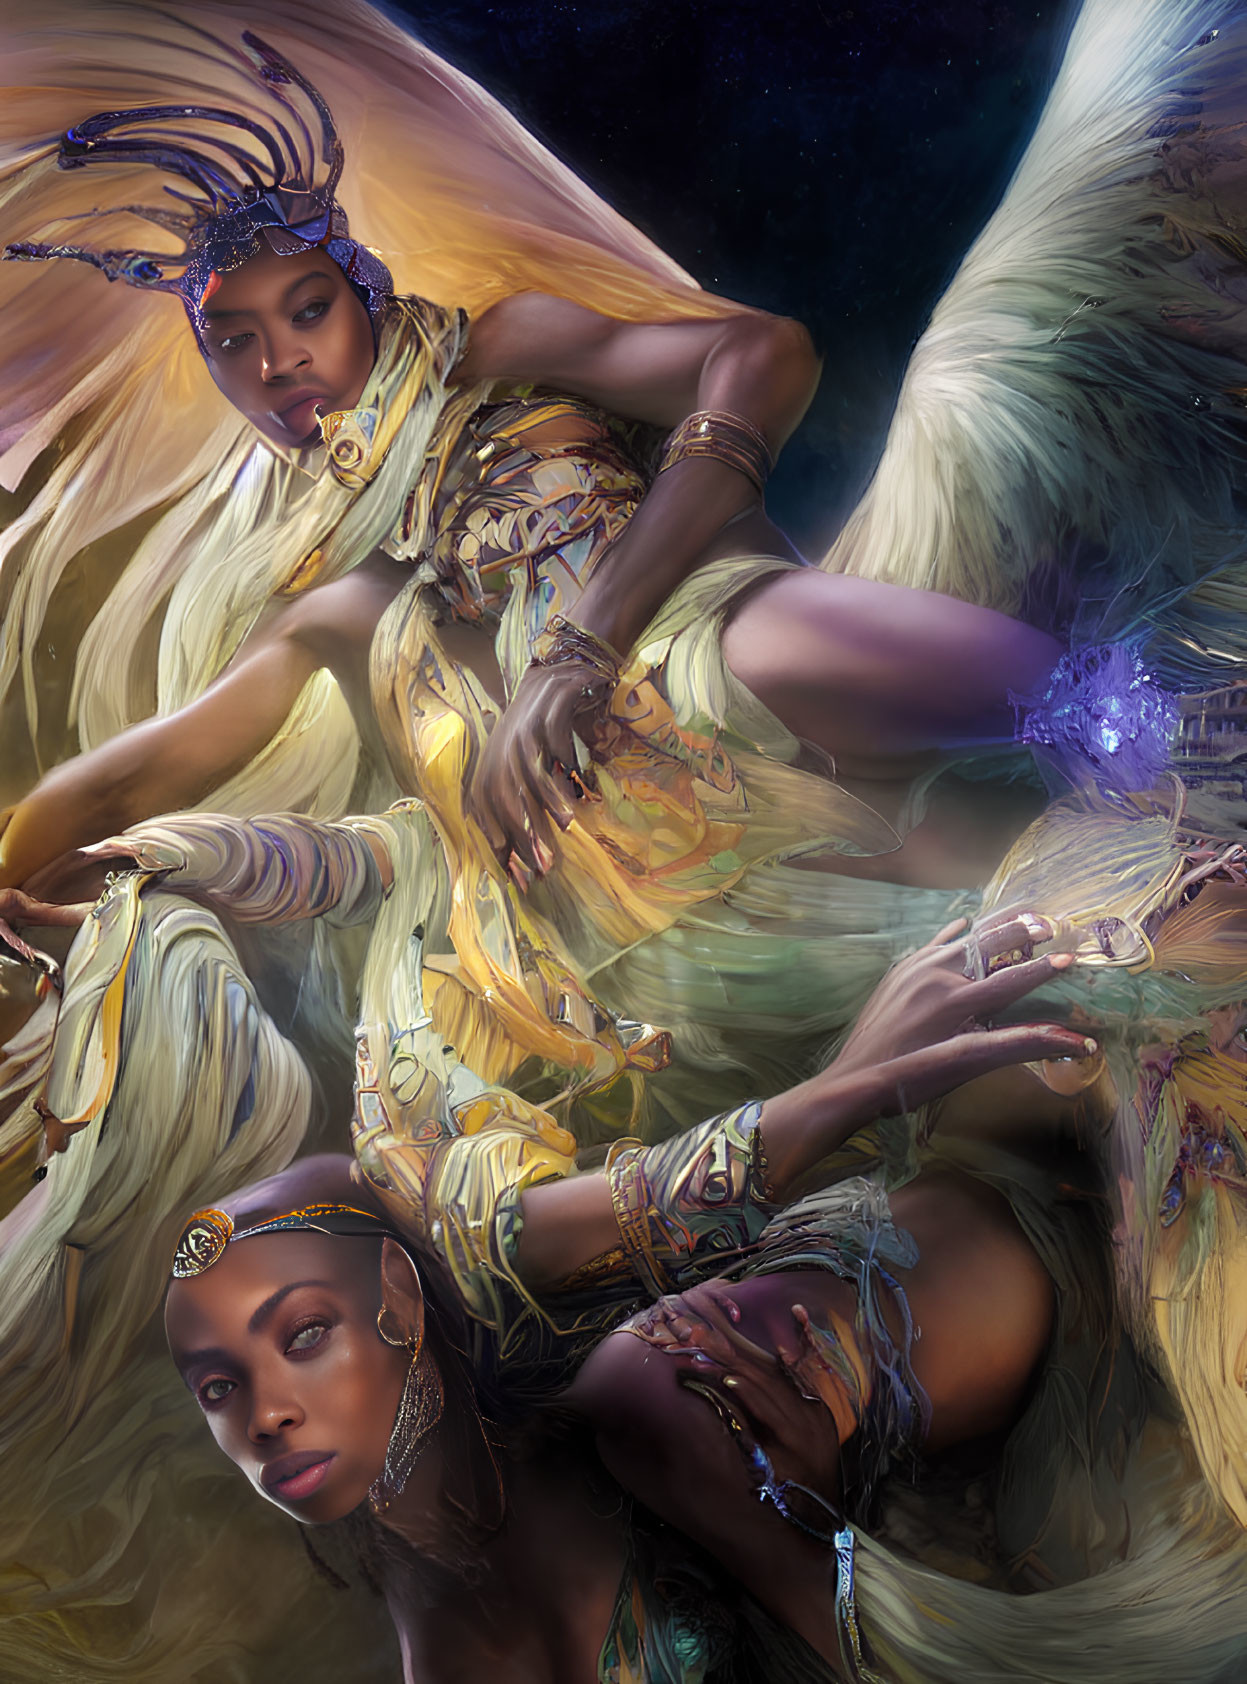 Ethereal artwork featuring two women in golden jewelry and regal headdresses against a cosmic backdrop